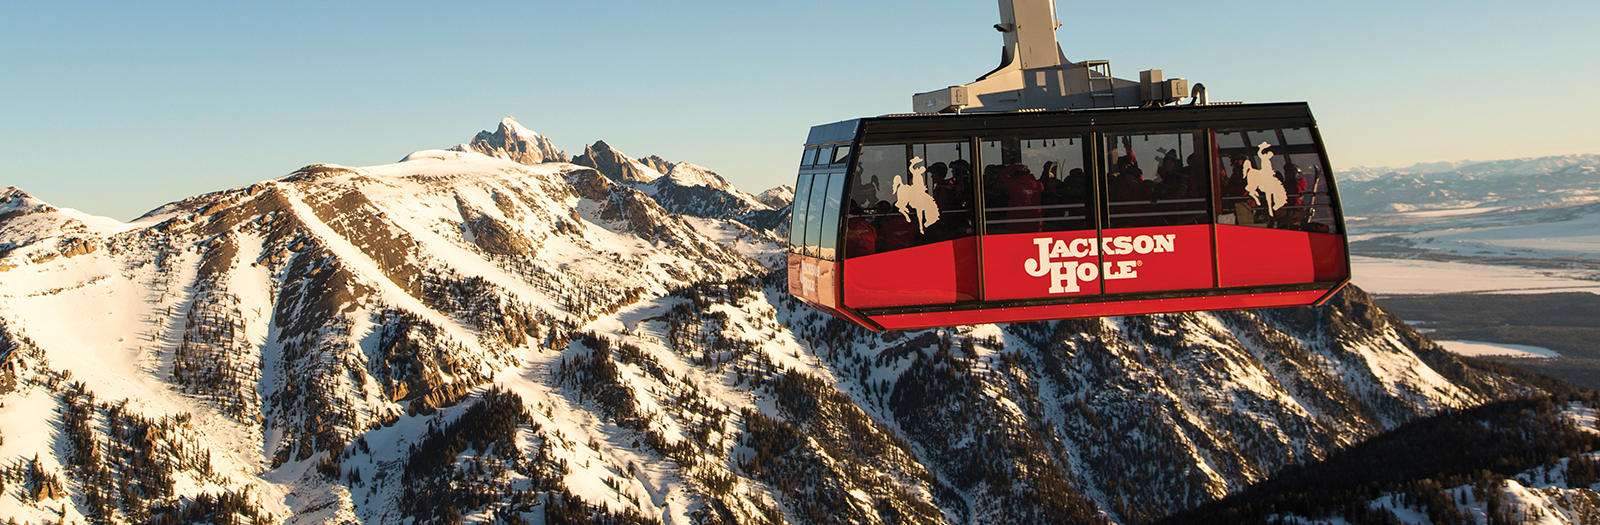 Discounted Jackson Hole Lift Tickets & Passes